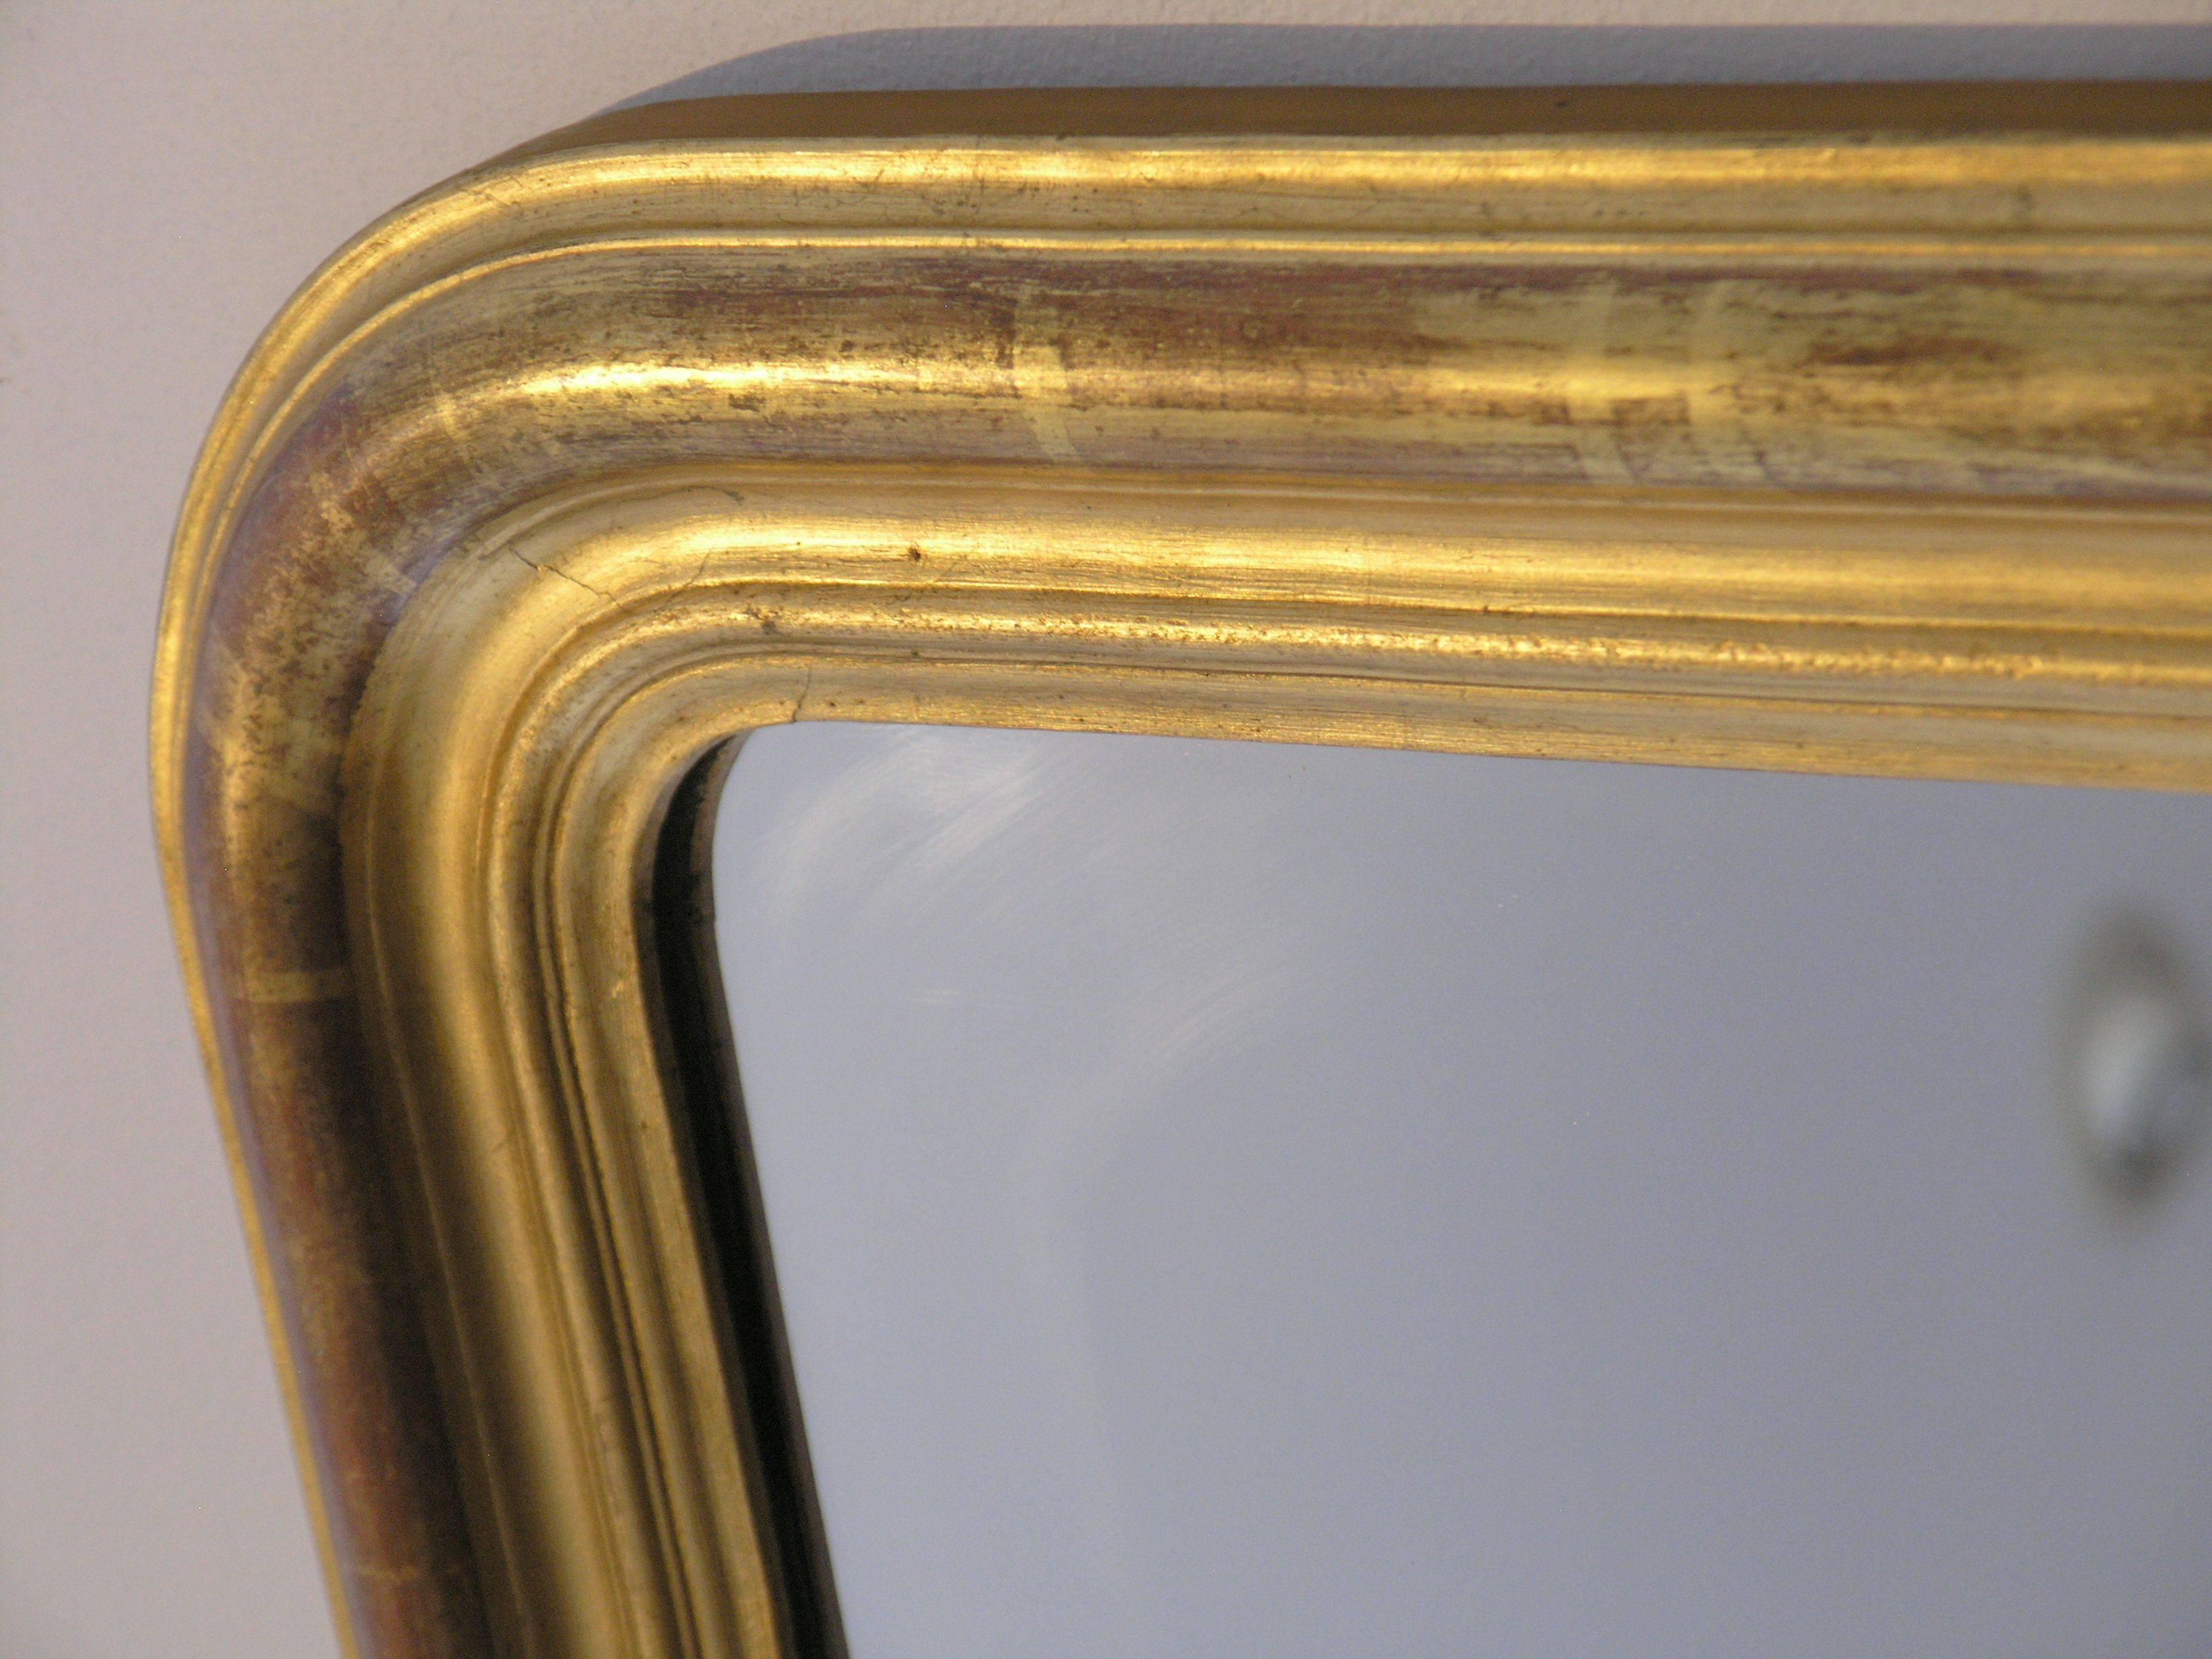 The arched rectangular plate within a molded giltwood border 